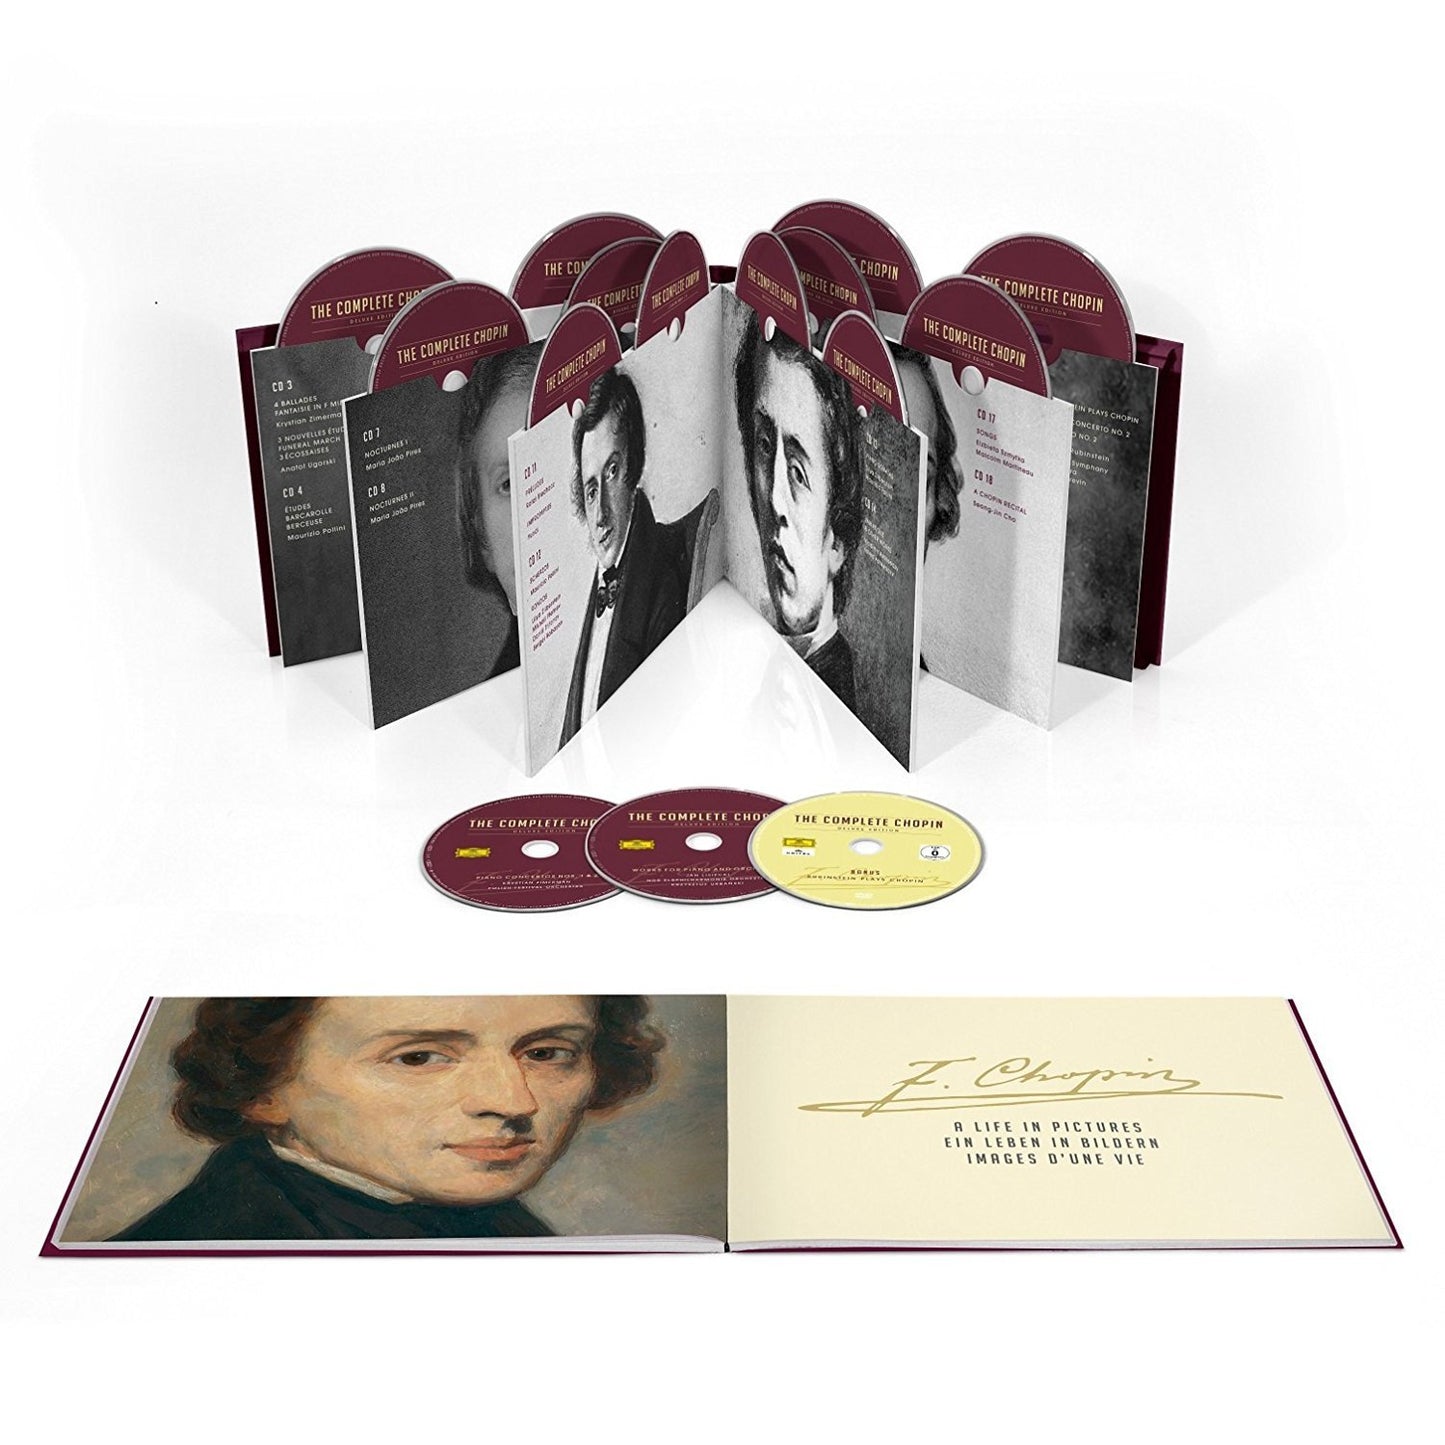 THE COMPLETE CHOPIN (Deluxe Edition) - 20 CDs + 1 DVD